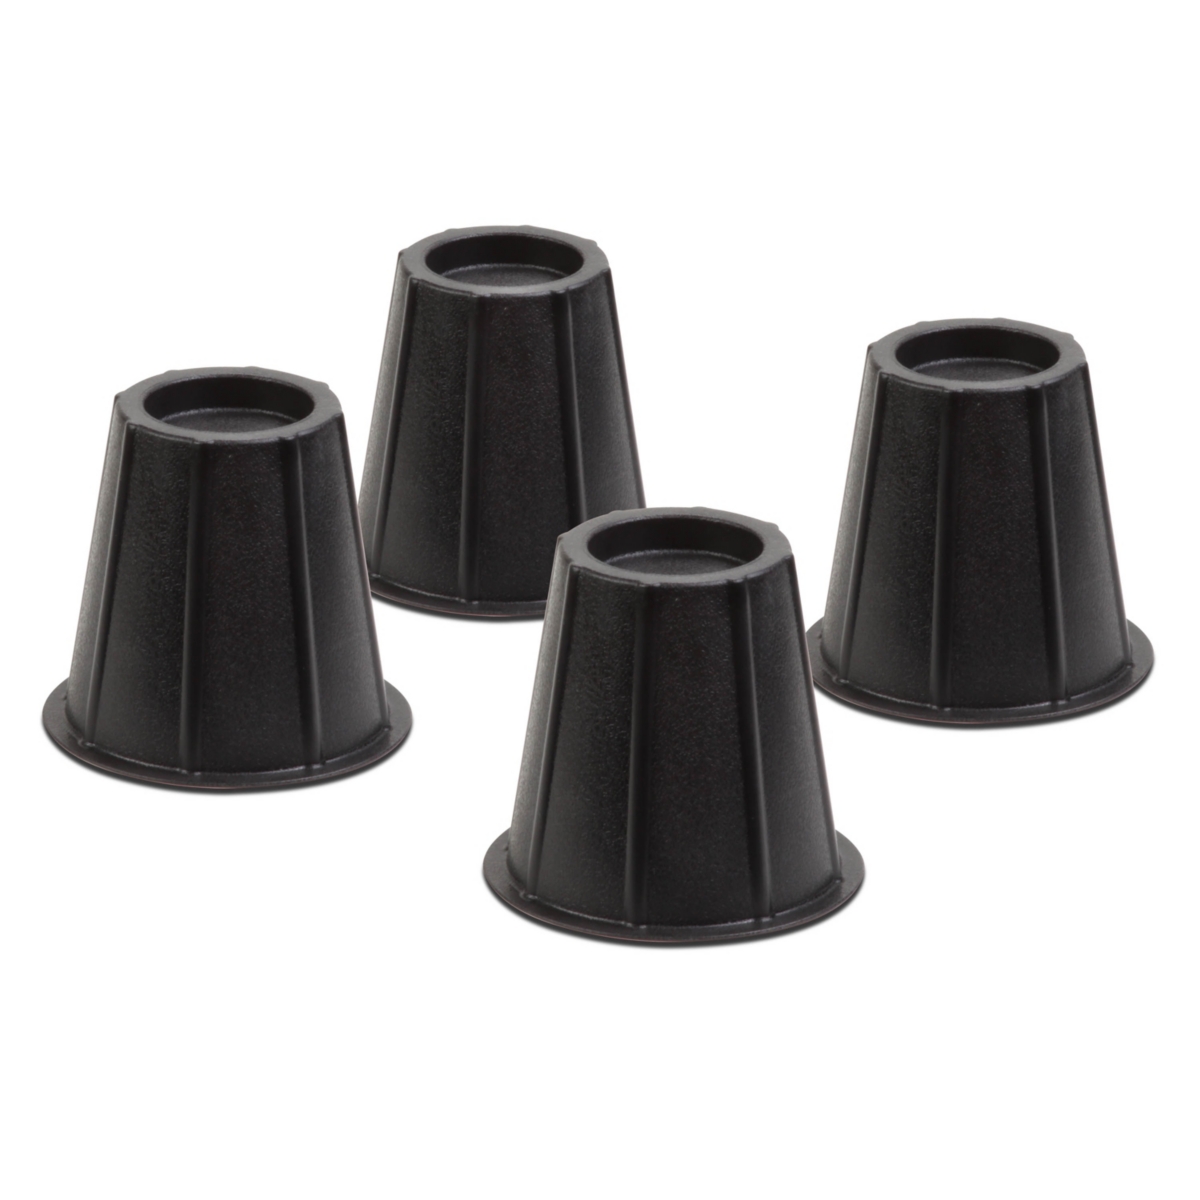 6" Round Bed Risers, Set of 4 - Black